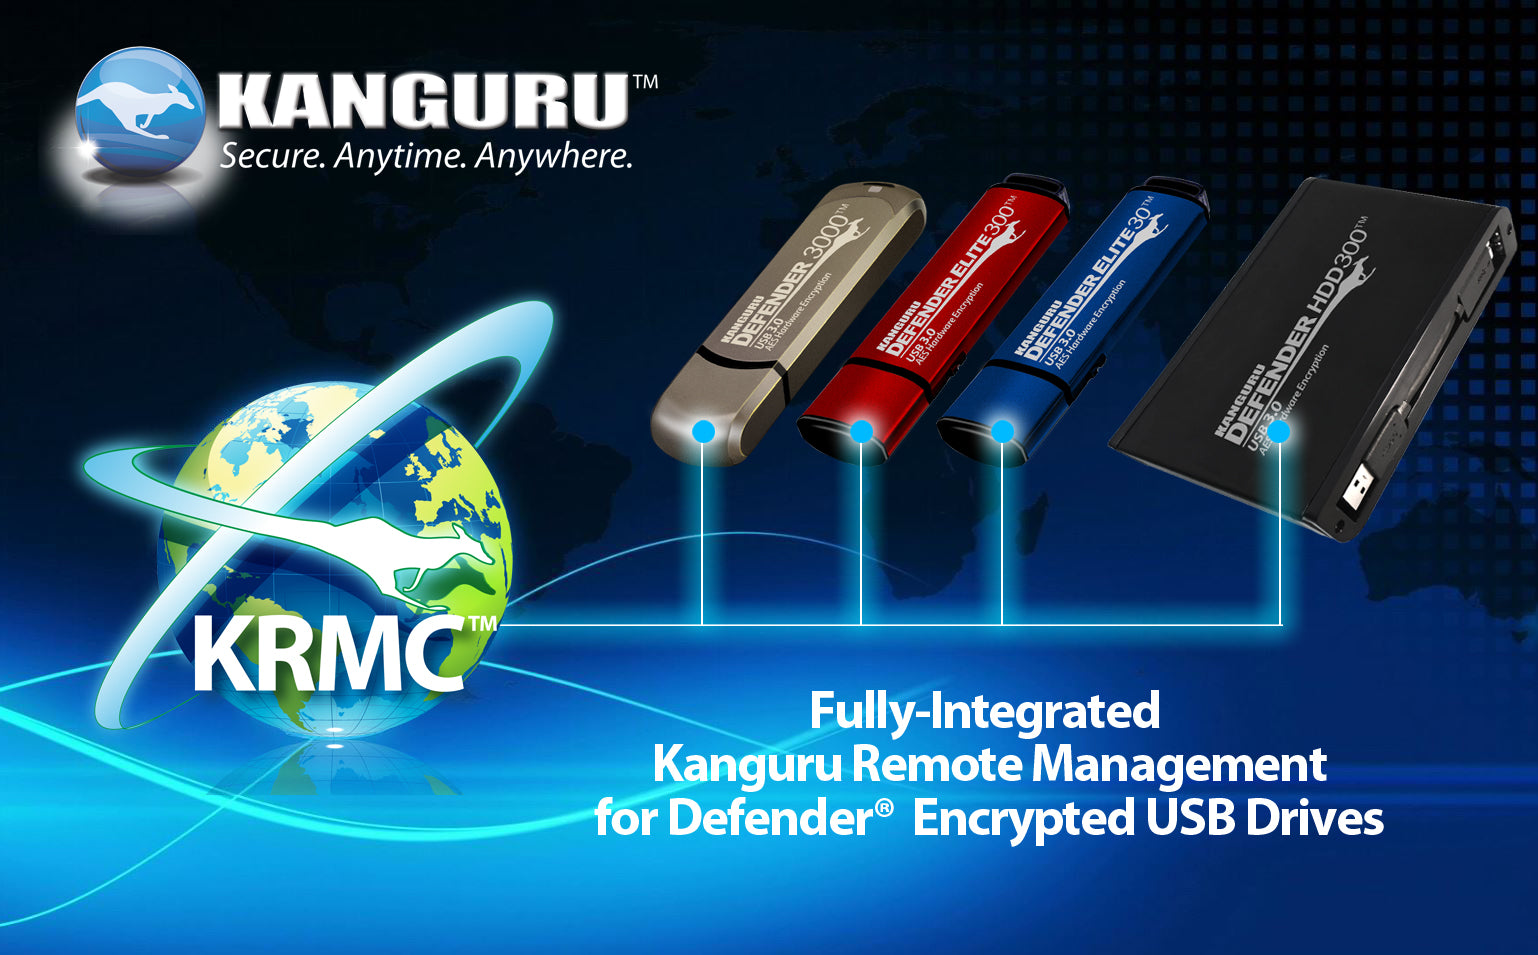 Kanguru Offers A Unique Hybrid Approach To Data Security With KRMC™